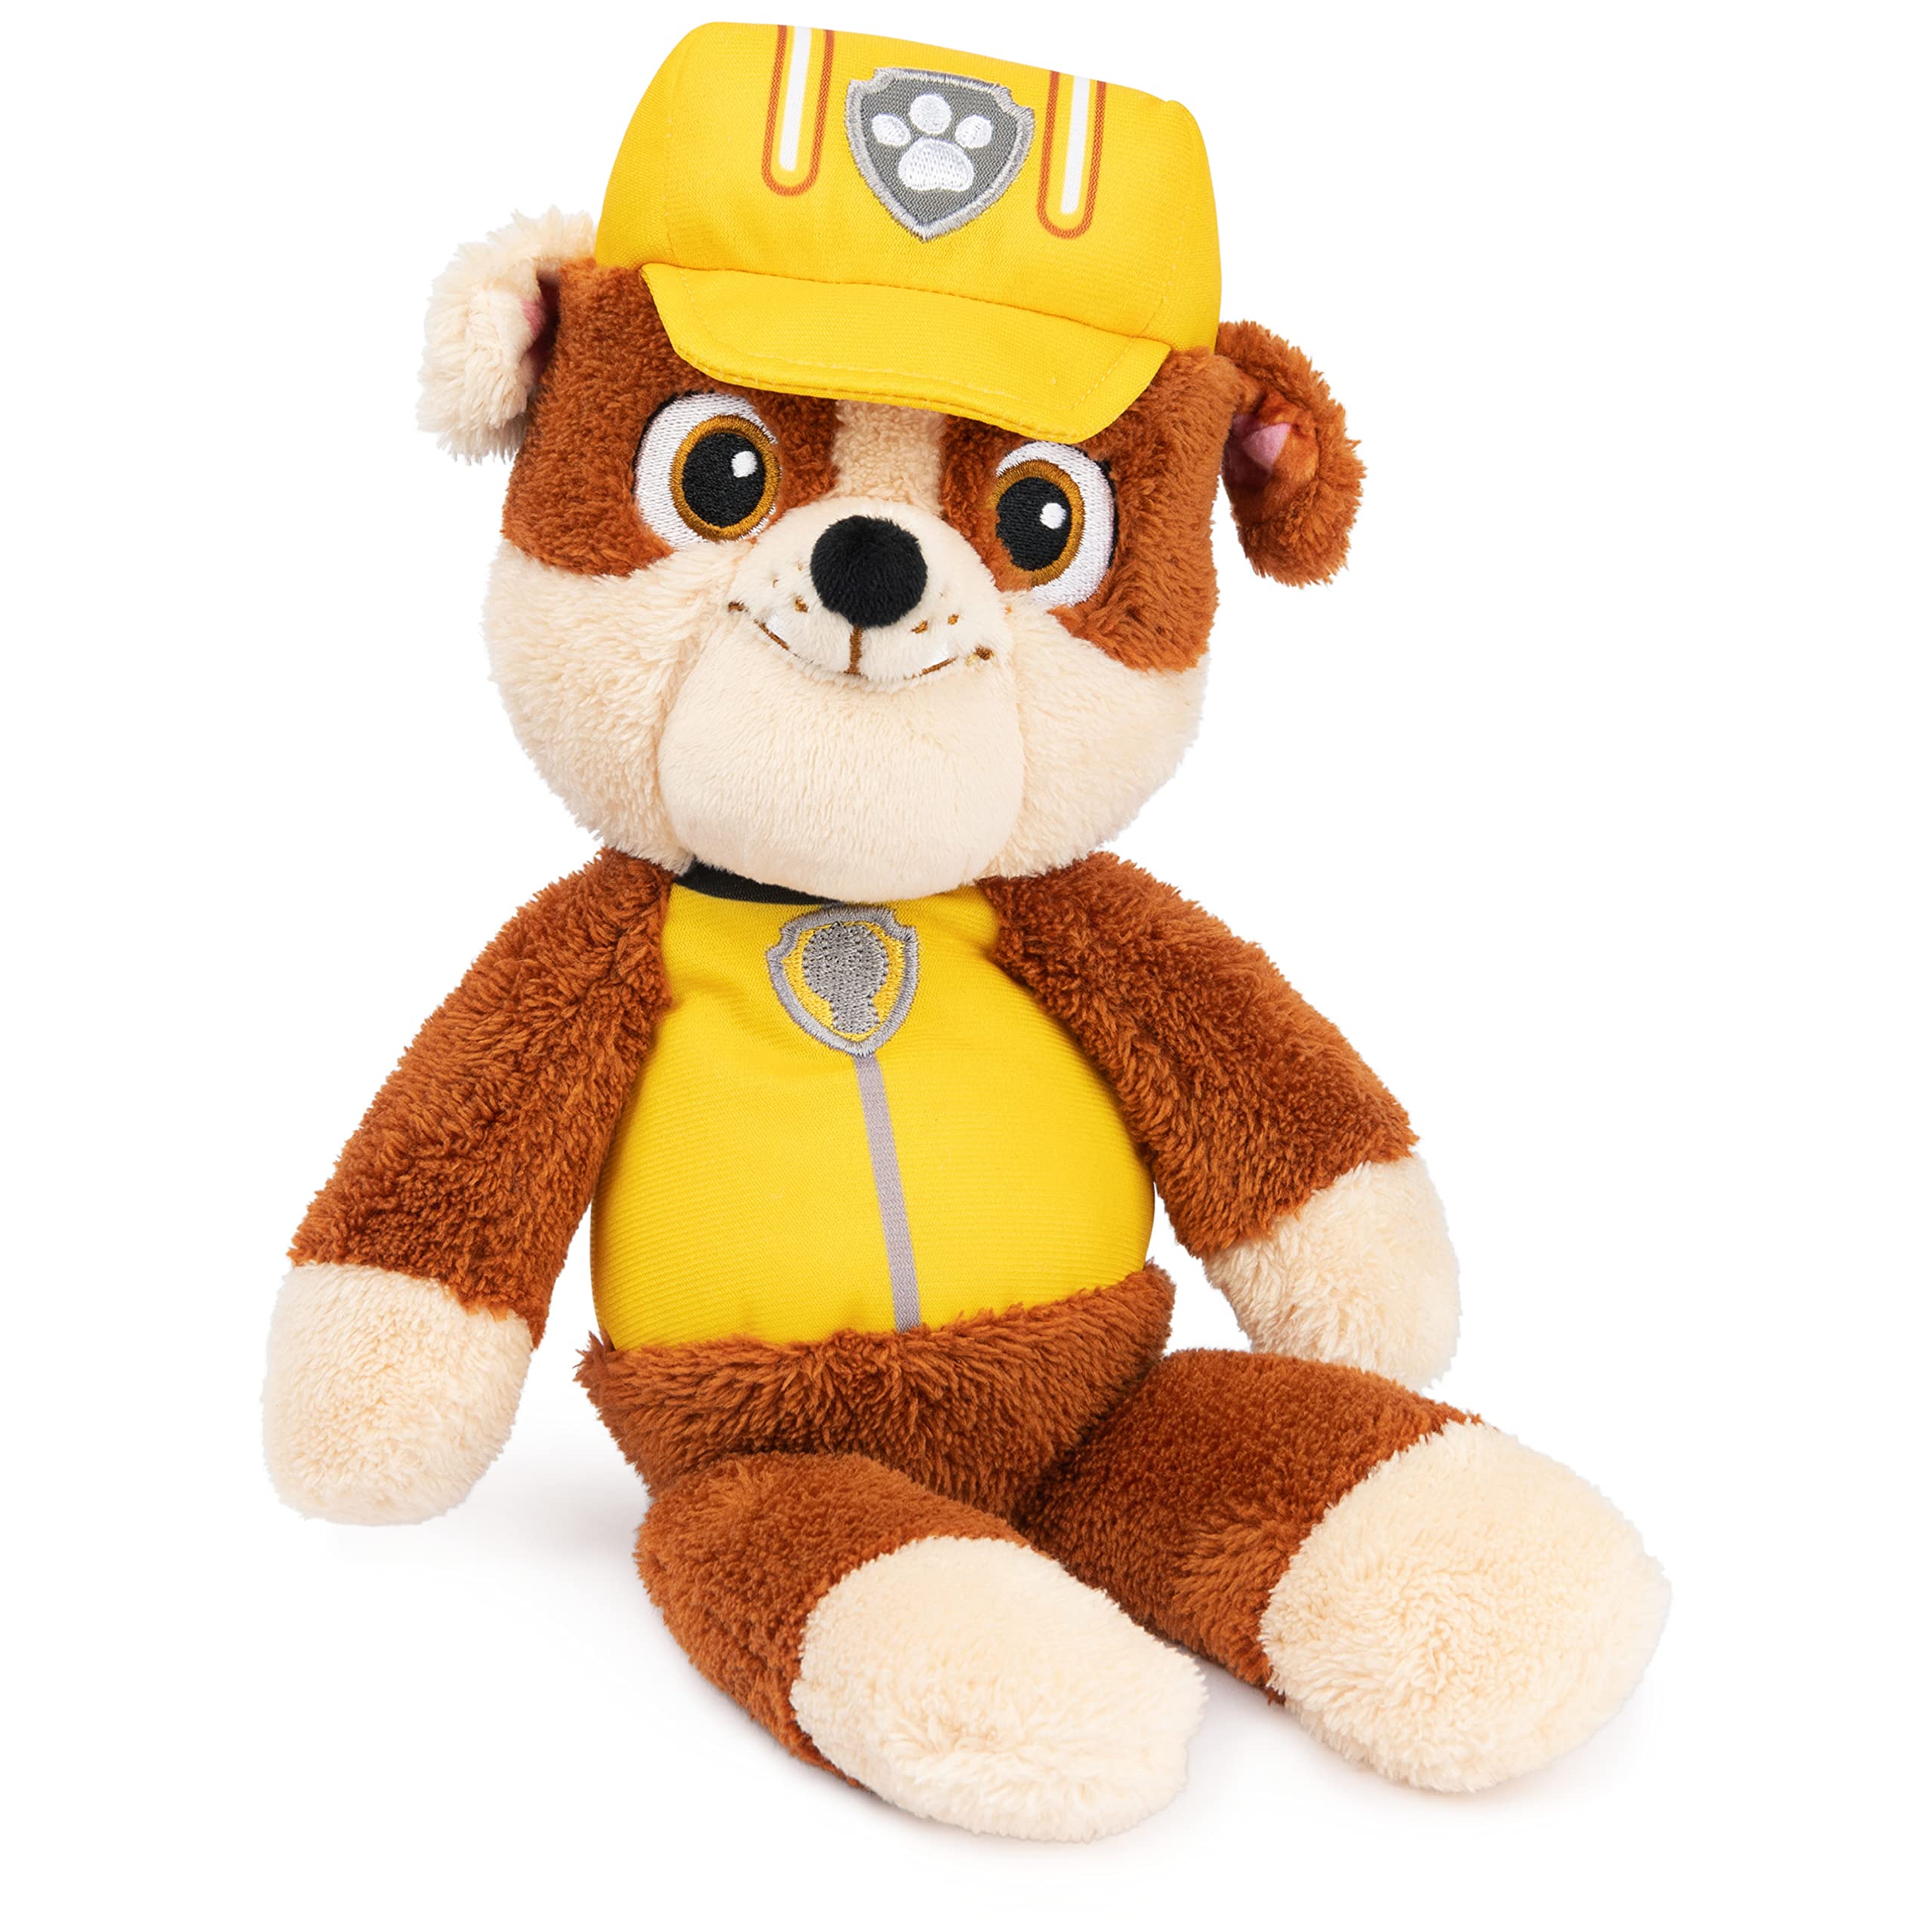 GUND PAW Patrol Official Rubble Take Along Buddy Plush Toy, Premium Stuffed Animal for Ages 1 & Up, Yellow/Brown, 13”